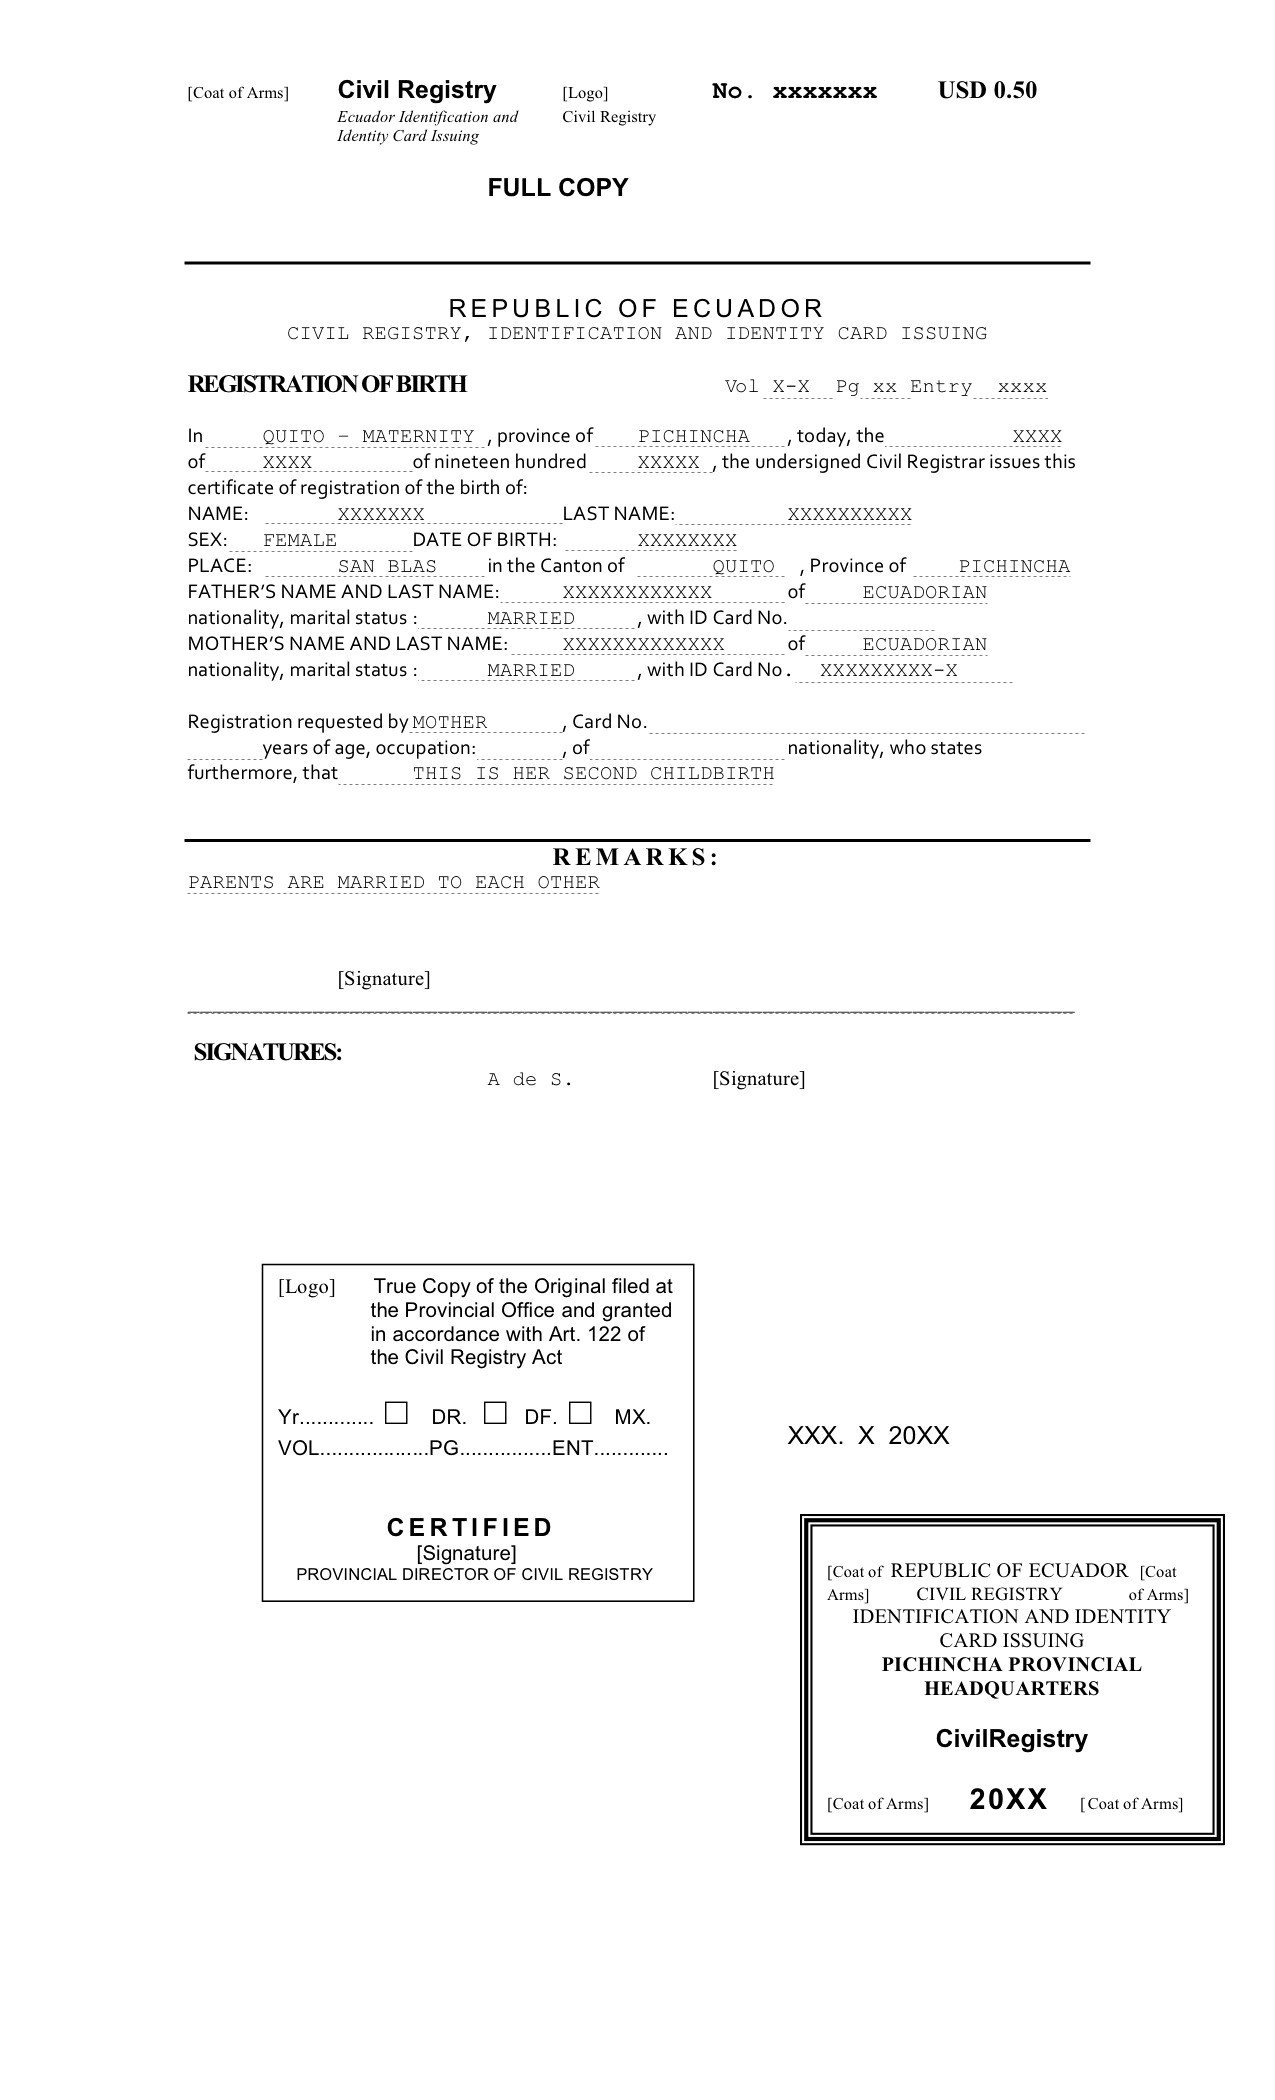 Death Certificate Translation From Spanish To English Sample with Death